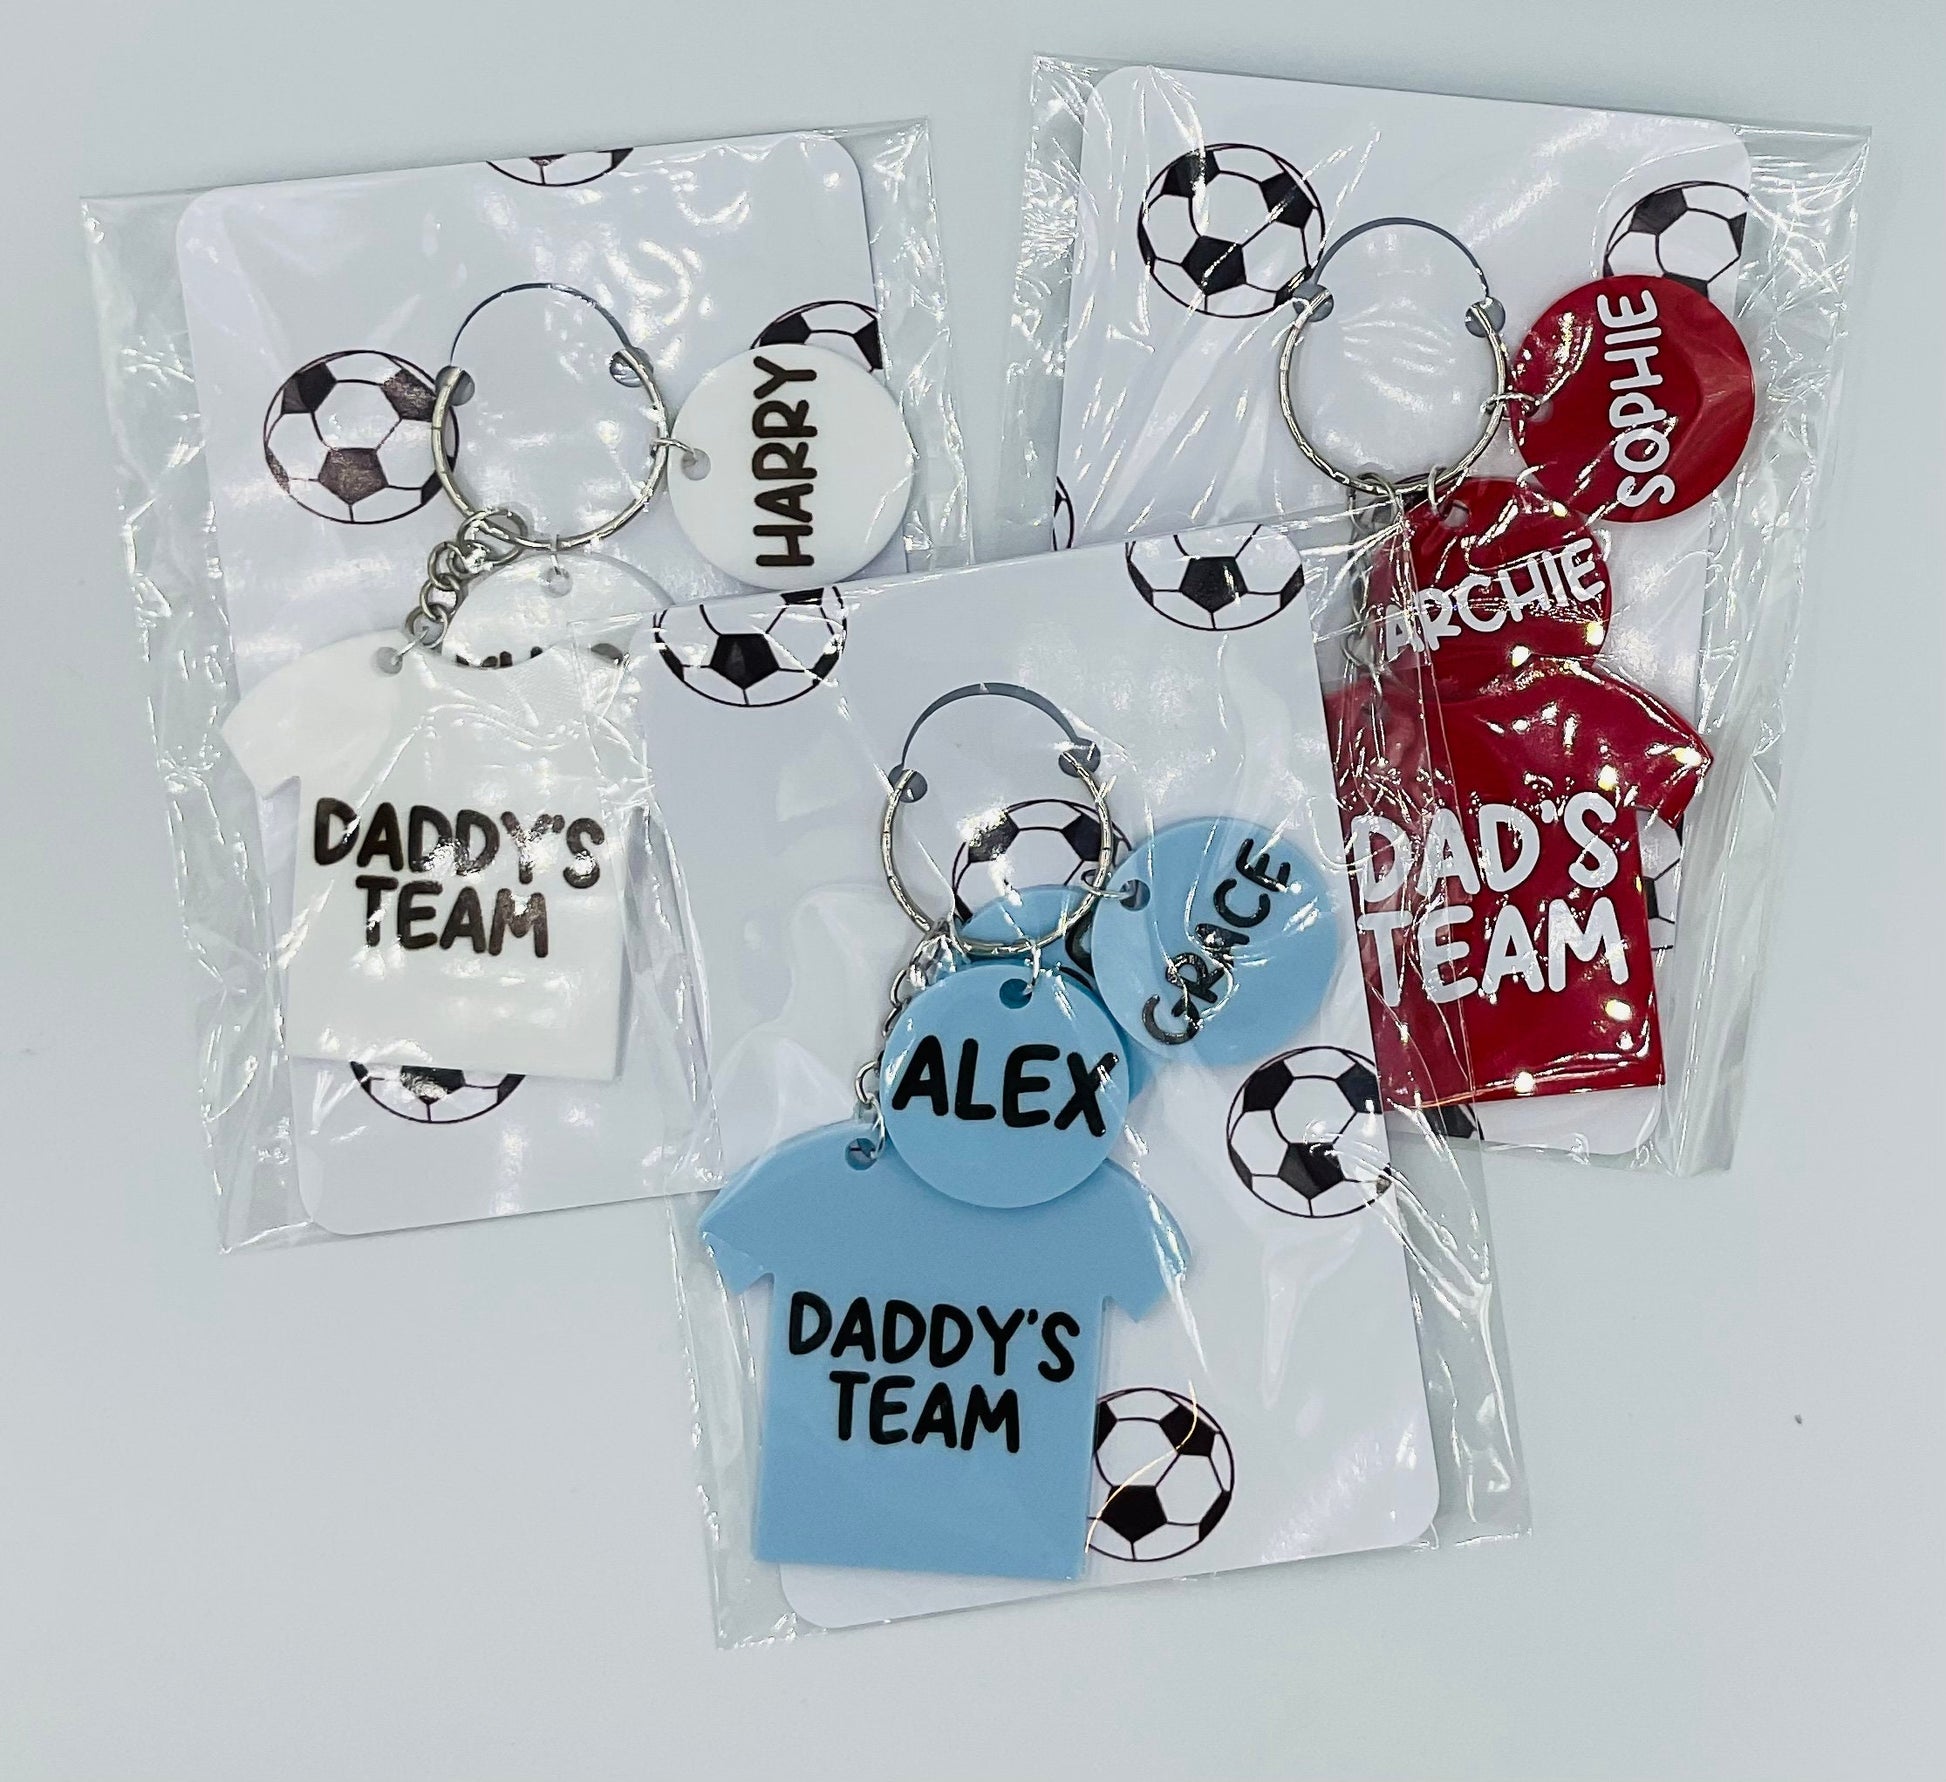 Fathers Day Keyring